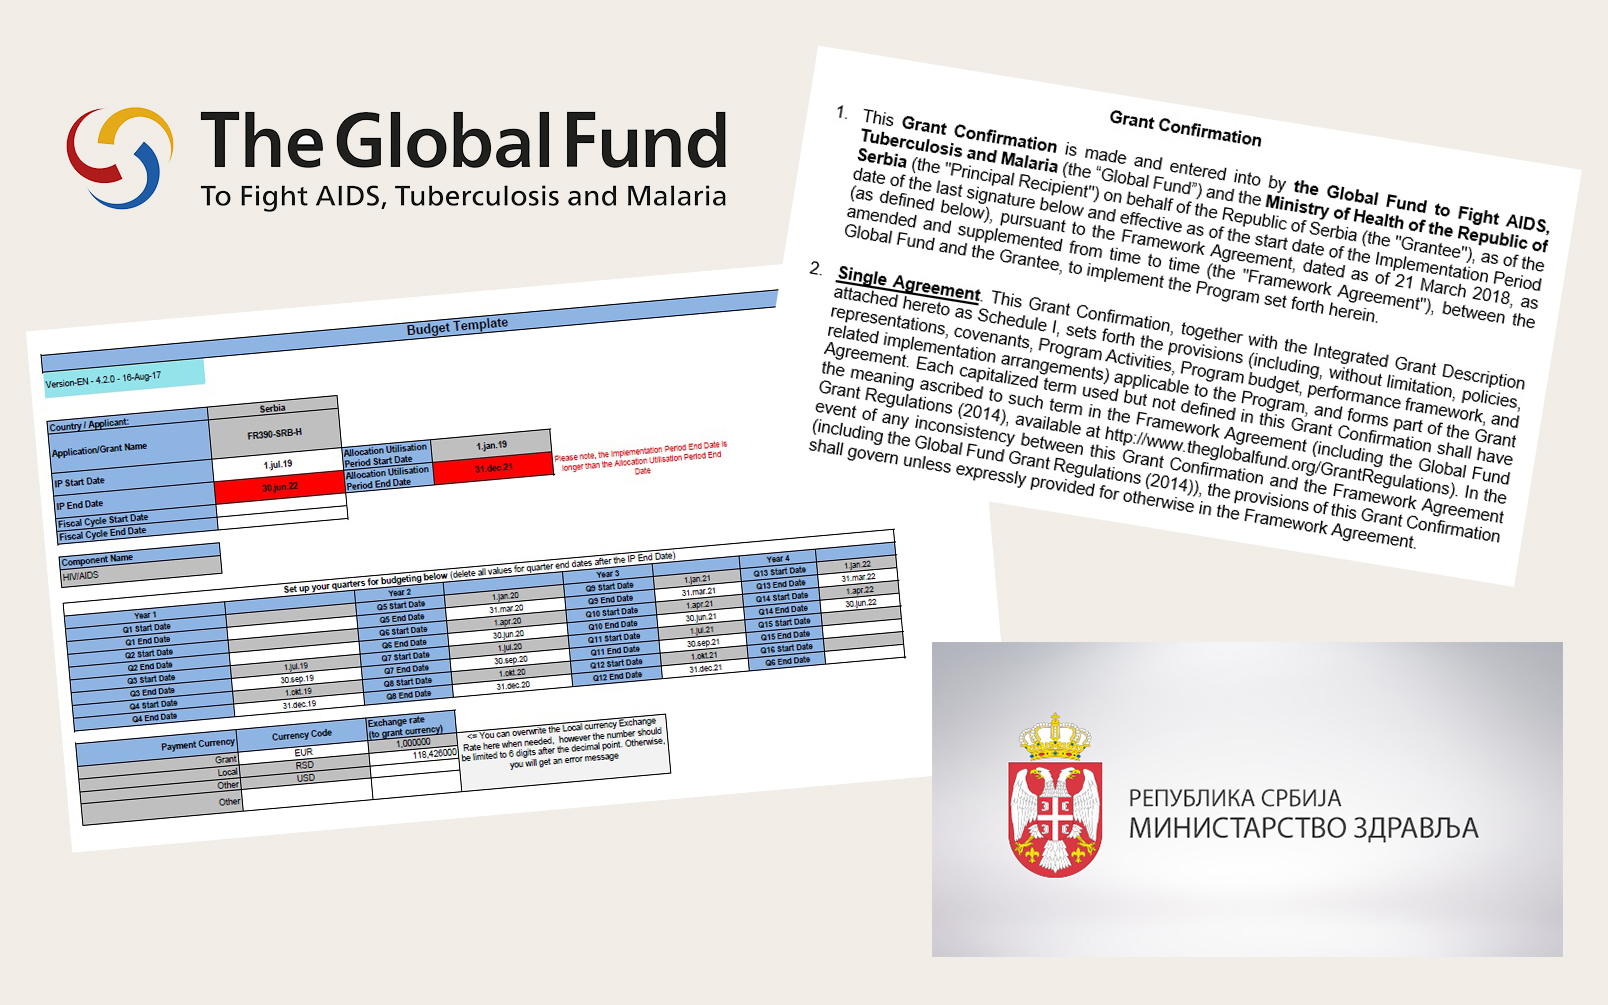 Serbia completed project application to the Global Fund